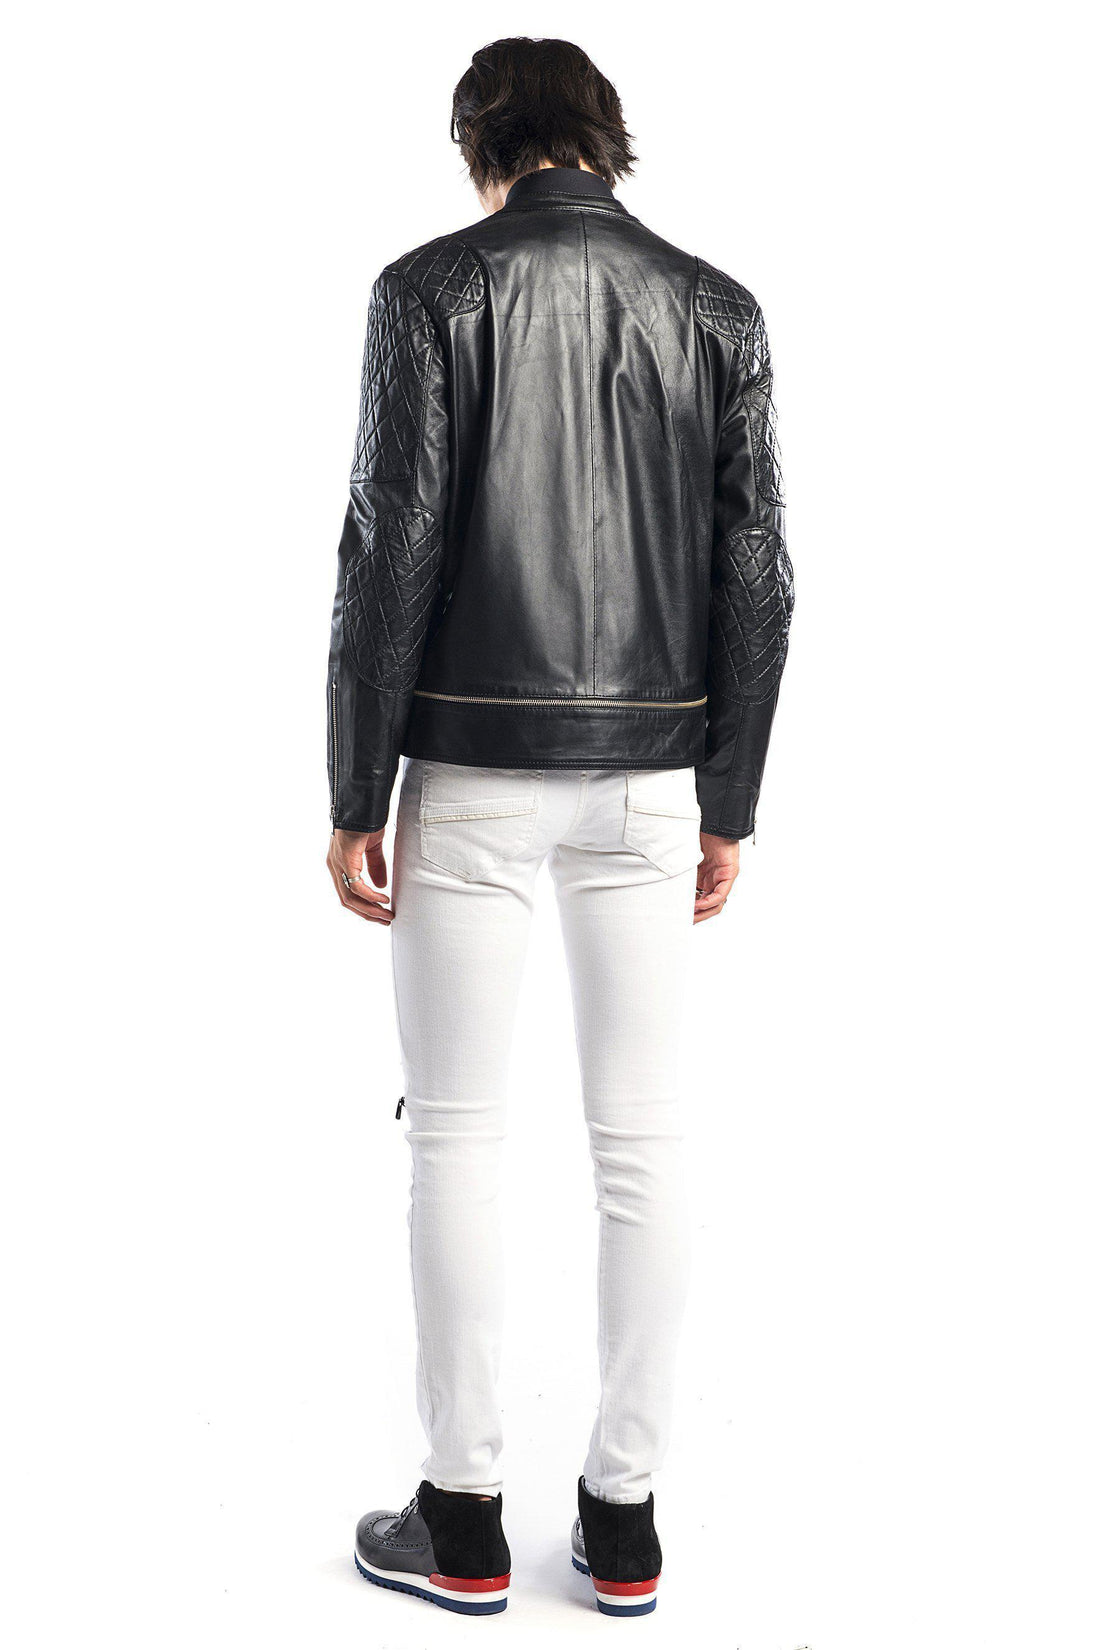 7802-Quilted Zip Leather Jacket - More Colors - Ron Tomson